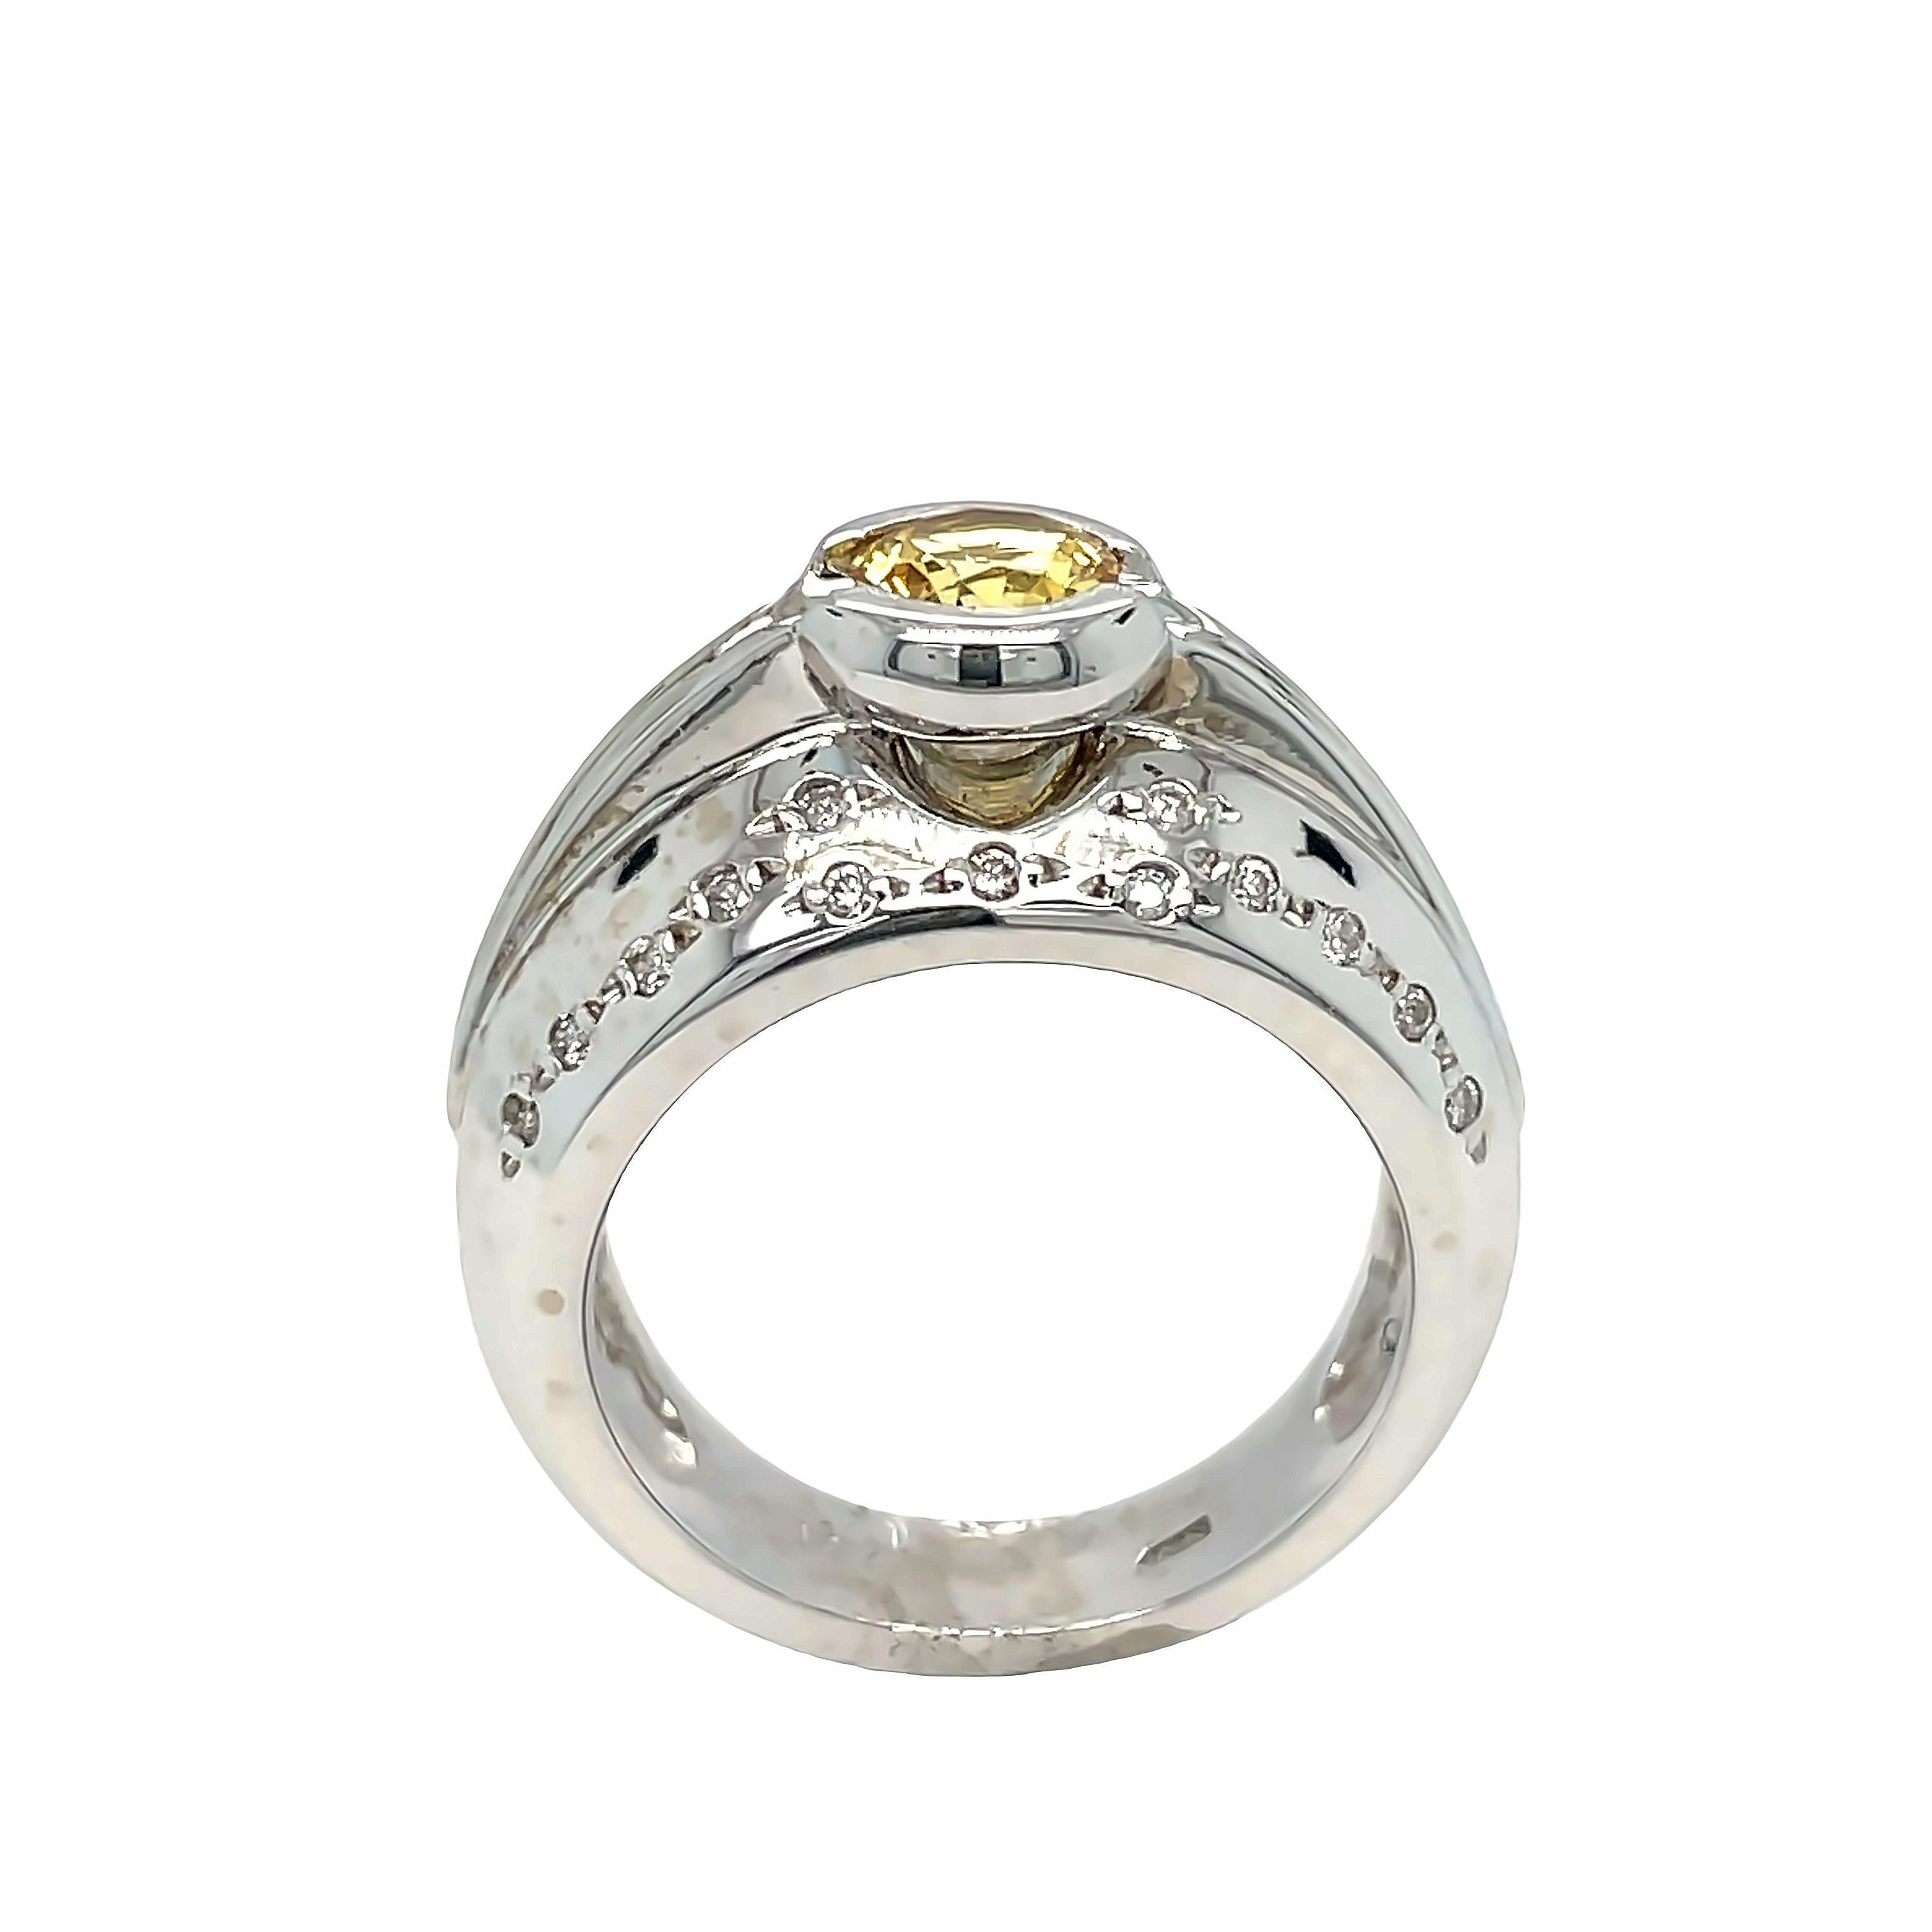 Elegant and contemporary, this 14K White Gold Citrine Diamond Ring features a stunning round Citrine weighing approximately 0.80 carat. Citrine is beautifully showcased in a raised semi-bezel setting, complemented by a dome setting adorned with